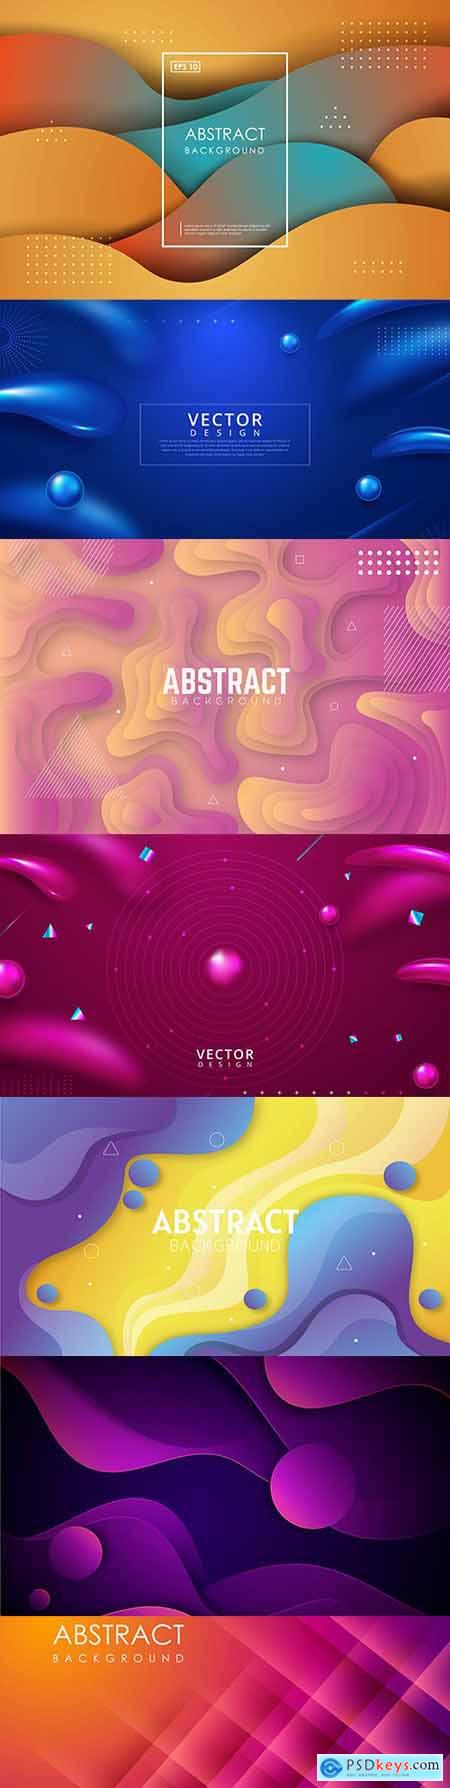 Geometric background shape gradient abstract composition